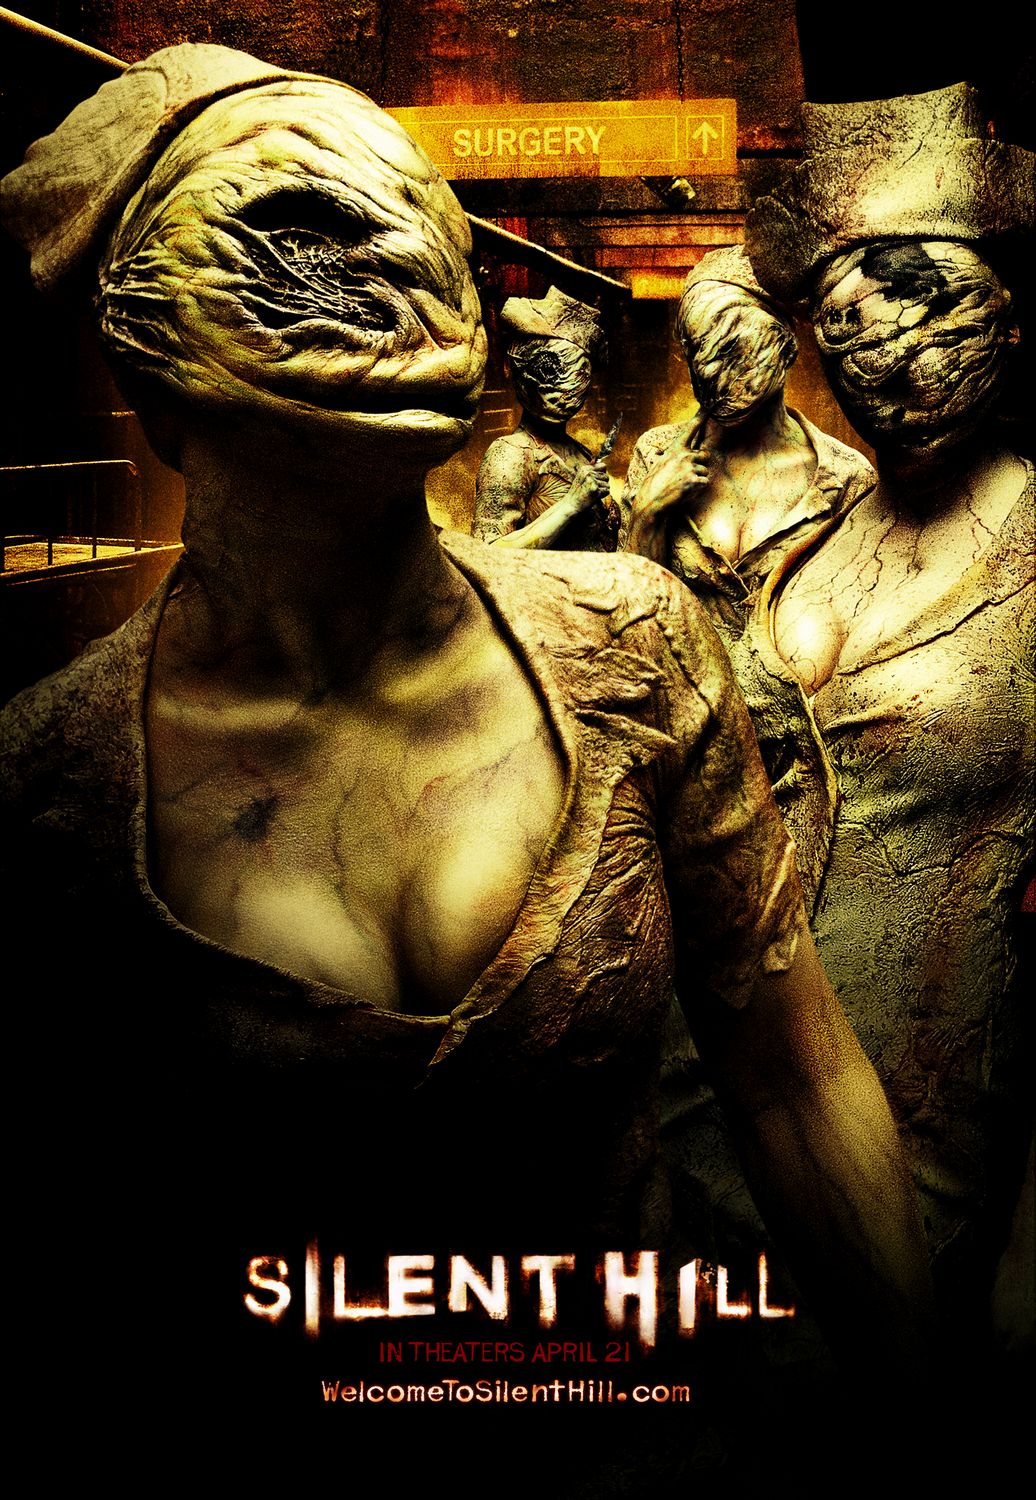 Extra Large Movie Poster Image for Silent Hill (#6 of 11)